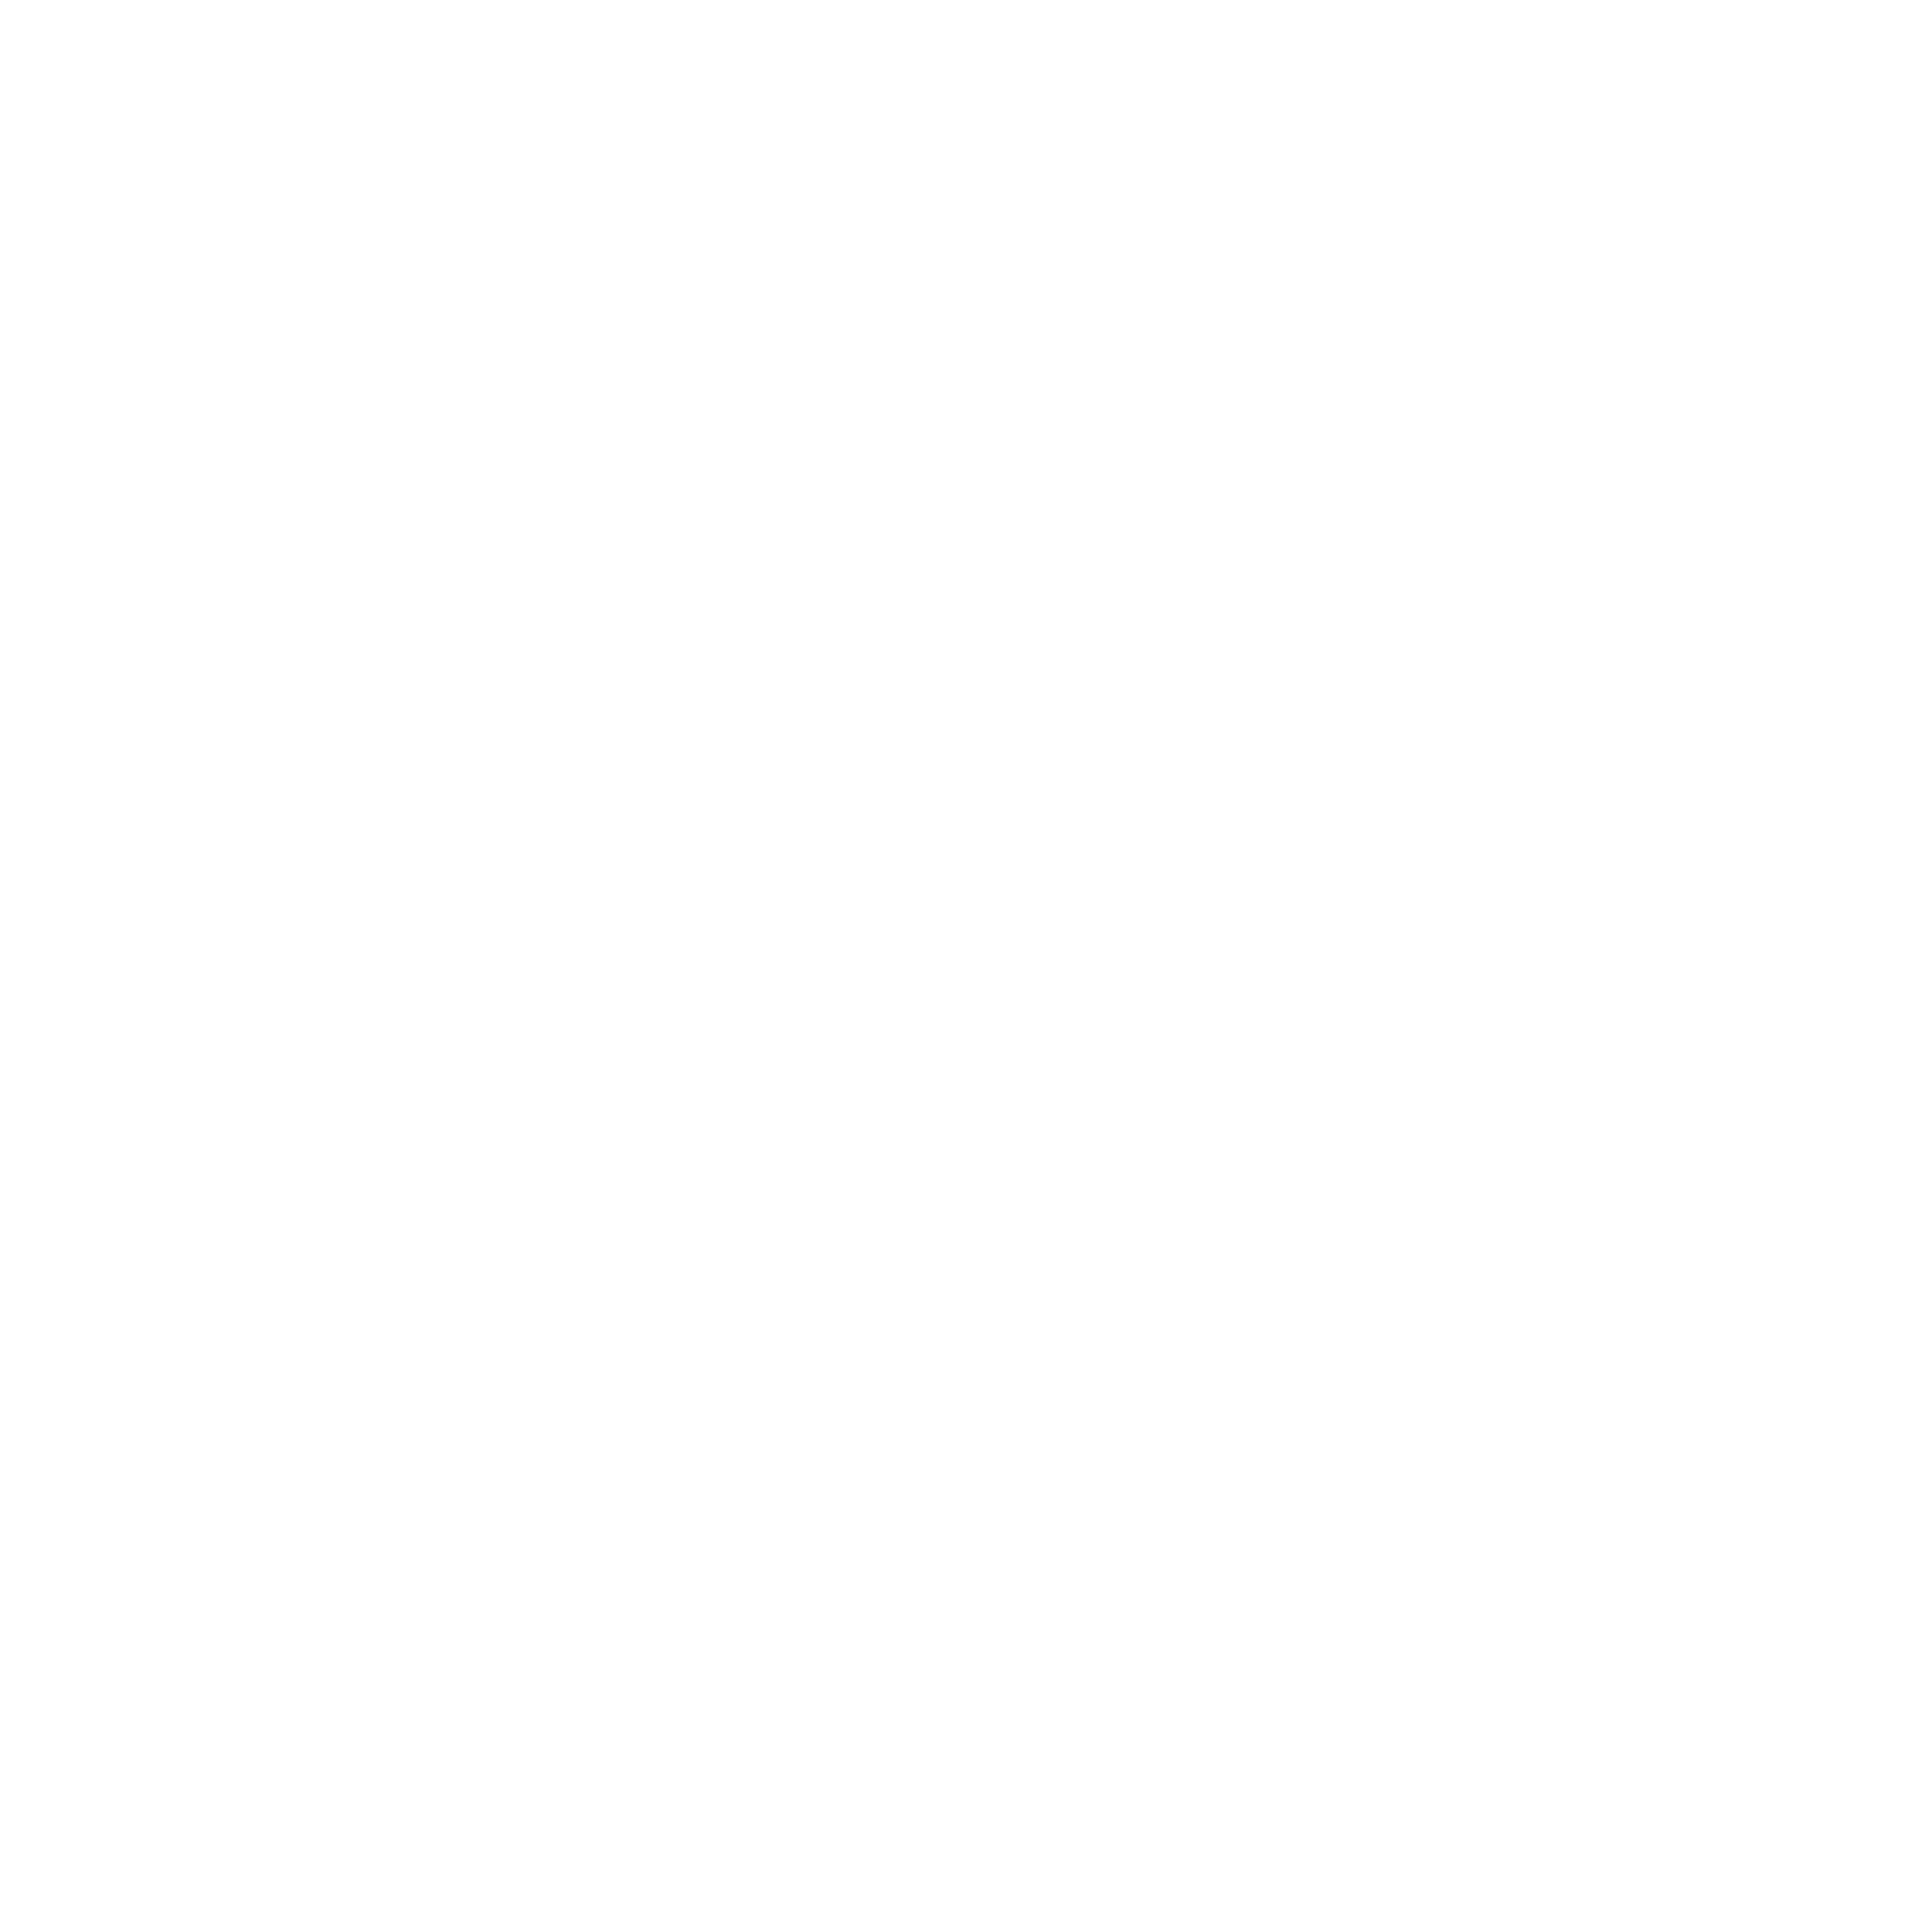 Tens-day logo.png